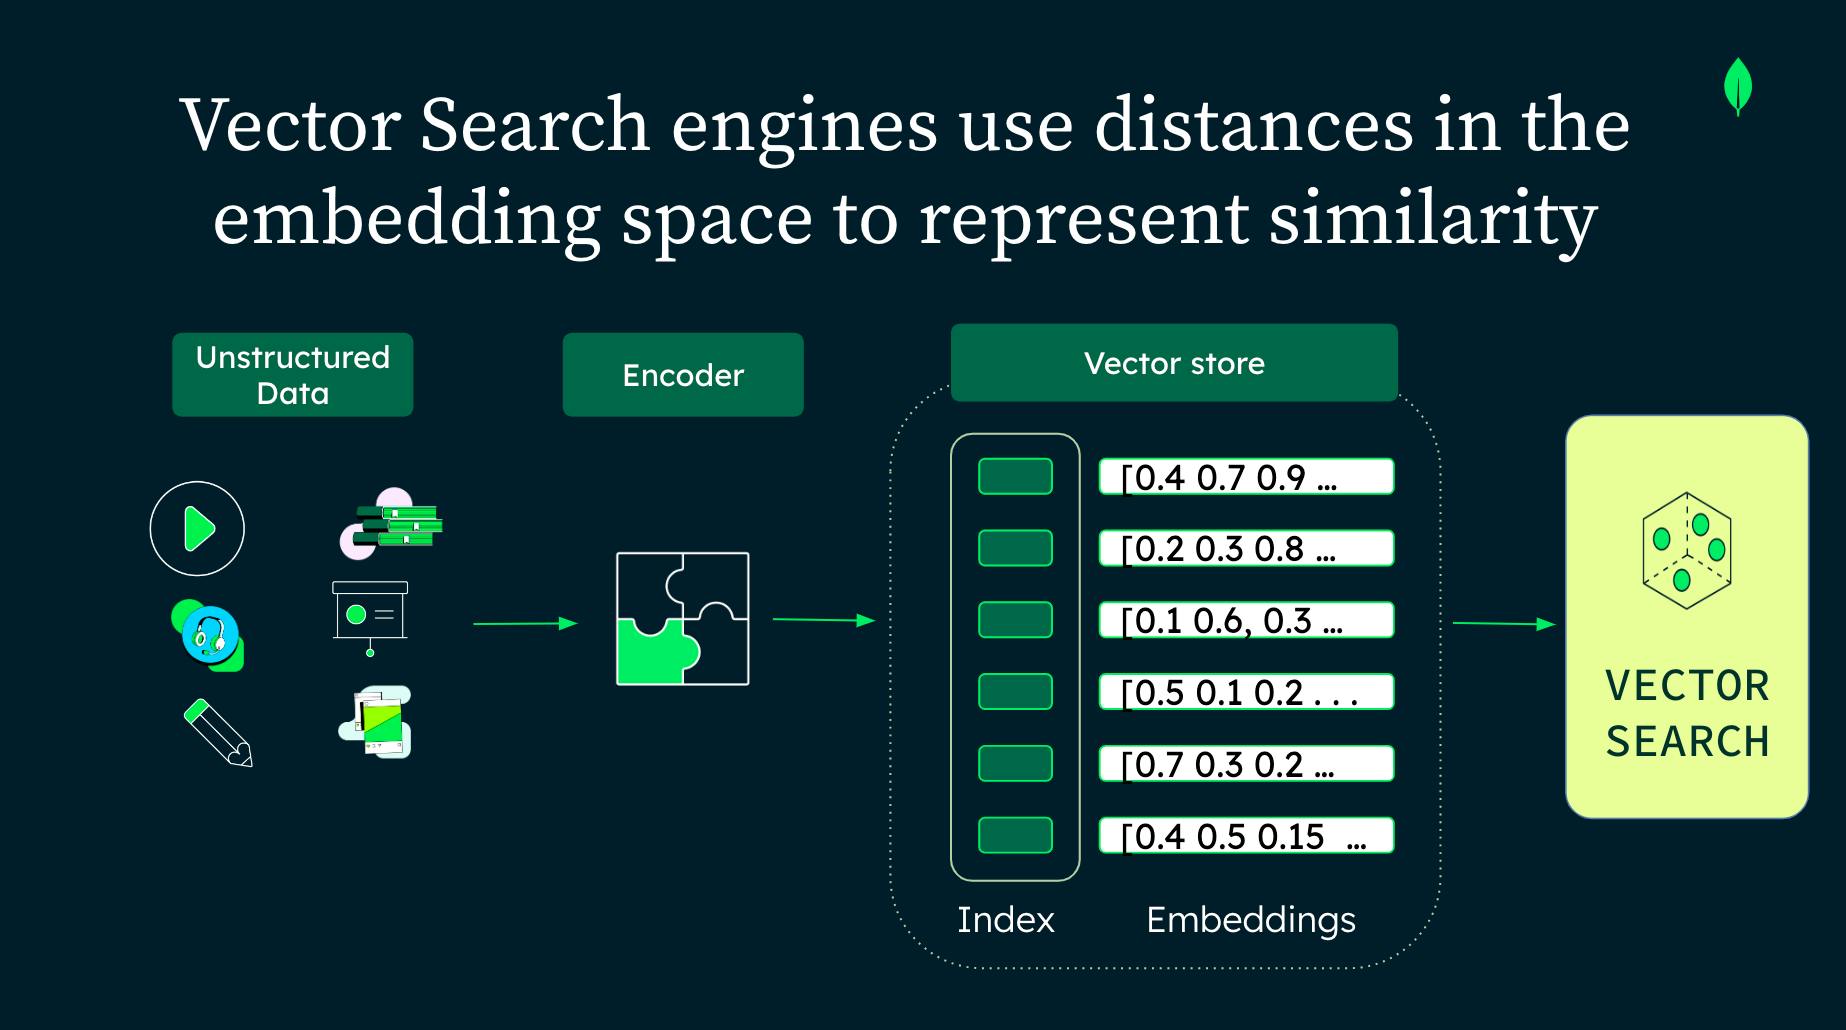 An image describing vector search including unstructured data, an encoder, and vector store.